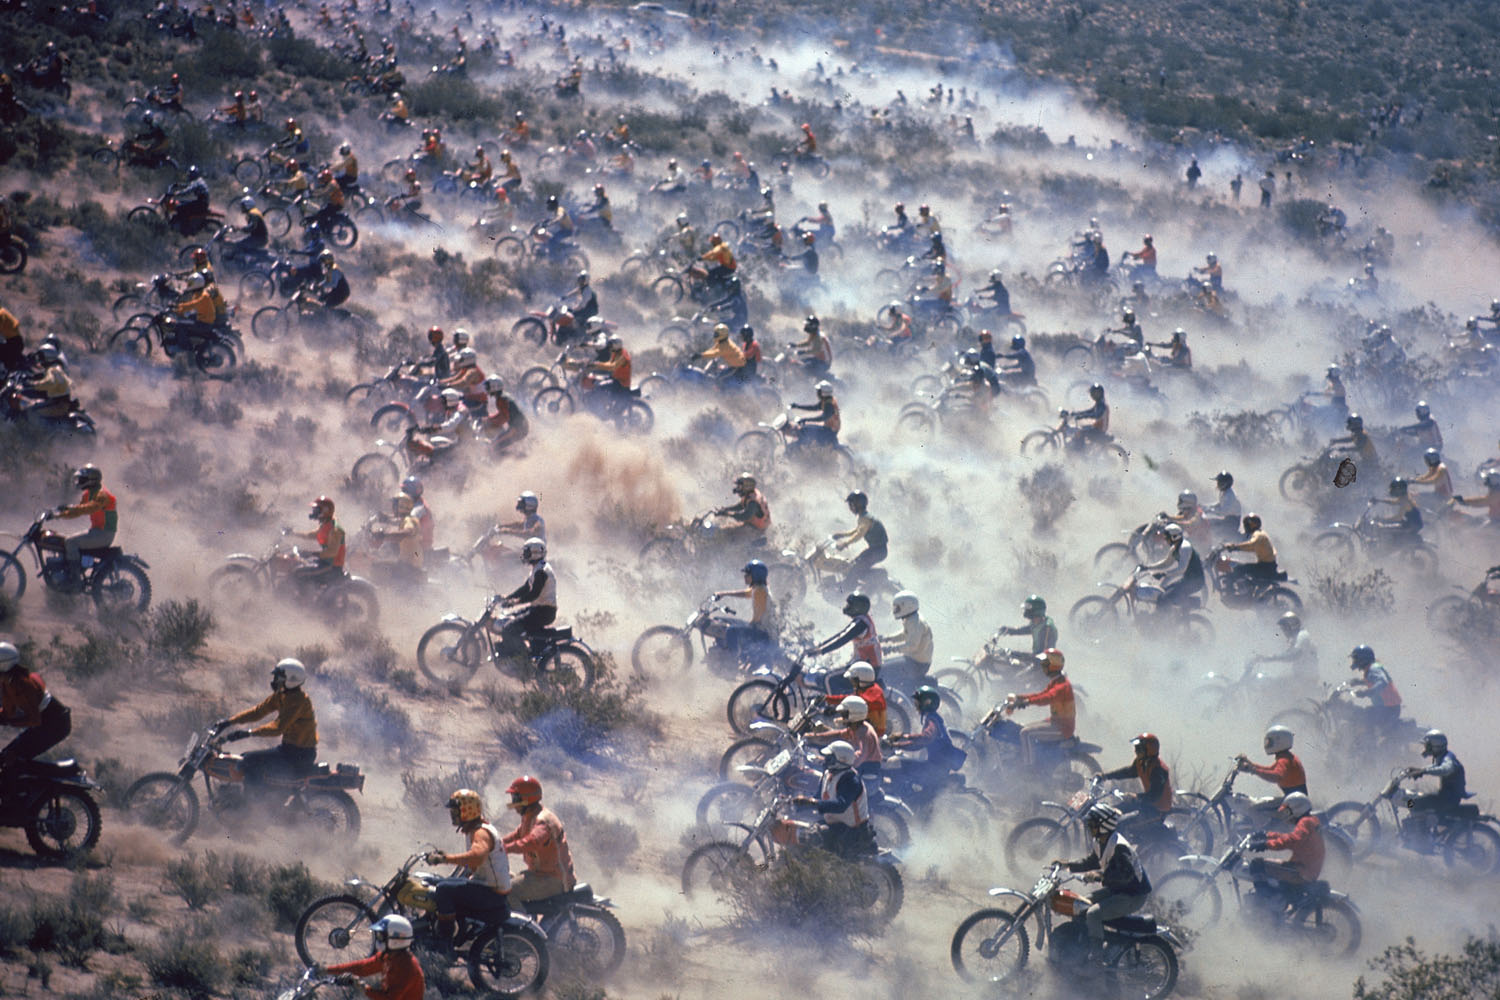 An aerial view of contestants in the Mint 400 Motocross endurance race through the Mojave Desert, Nevada, September 1971.